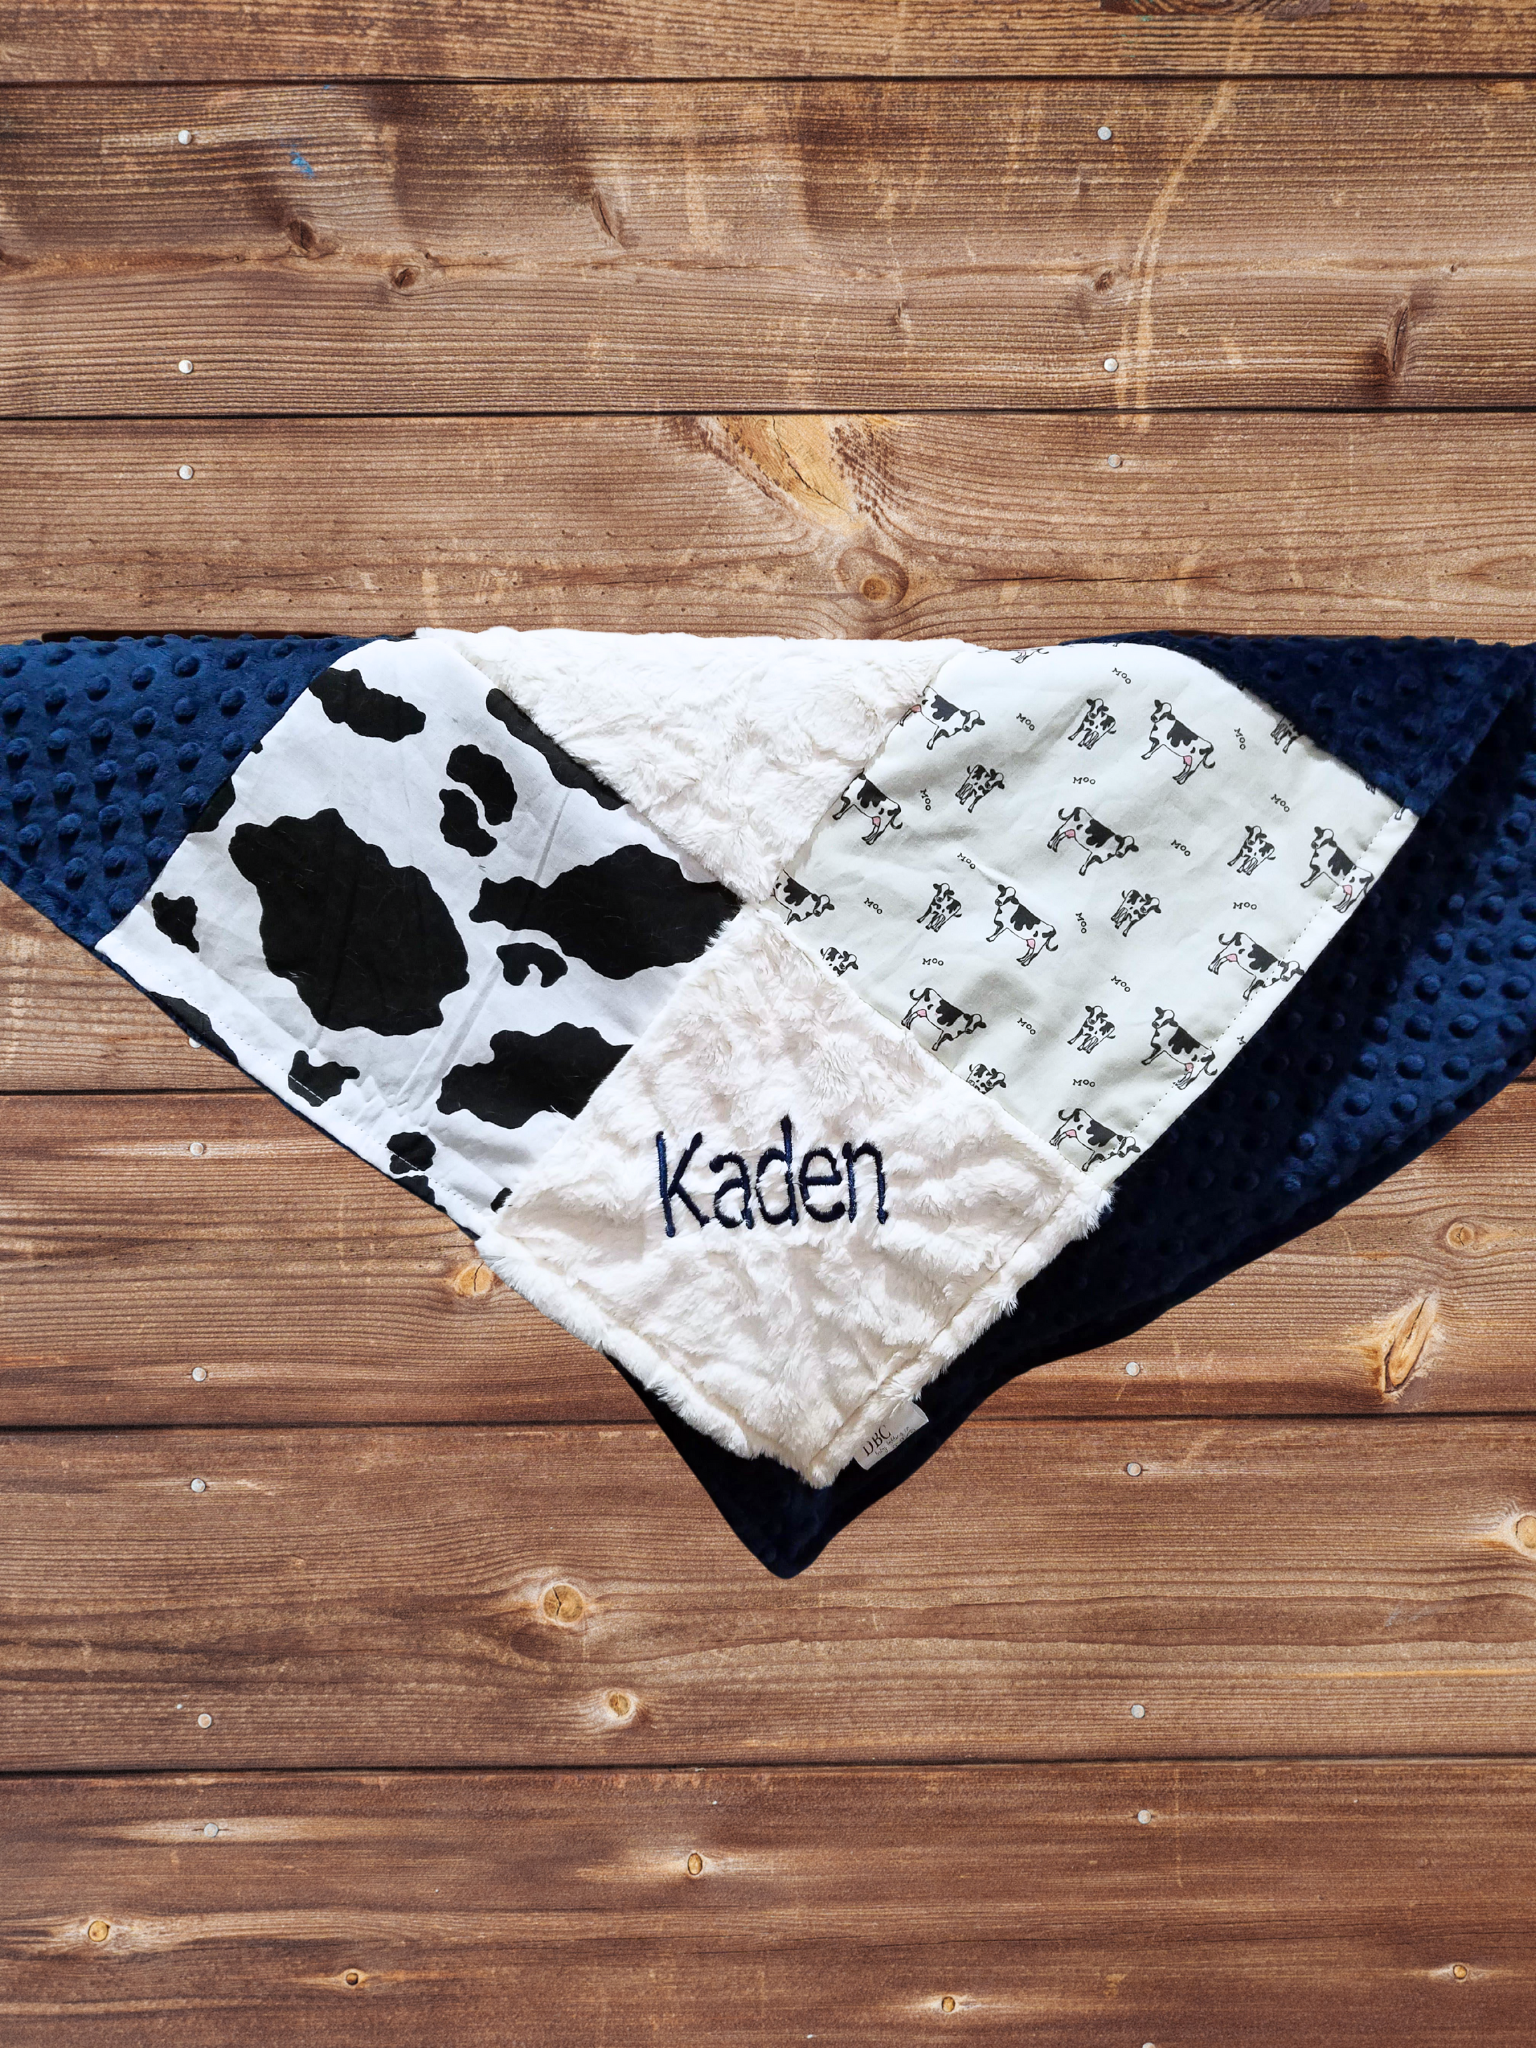 Patchwork Blanket - Cows and Black White Cow Print Farm Blanket